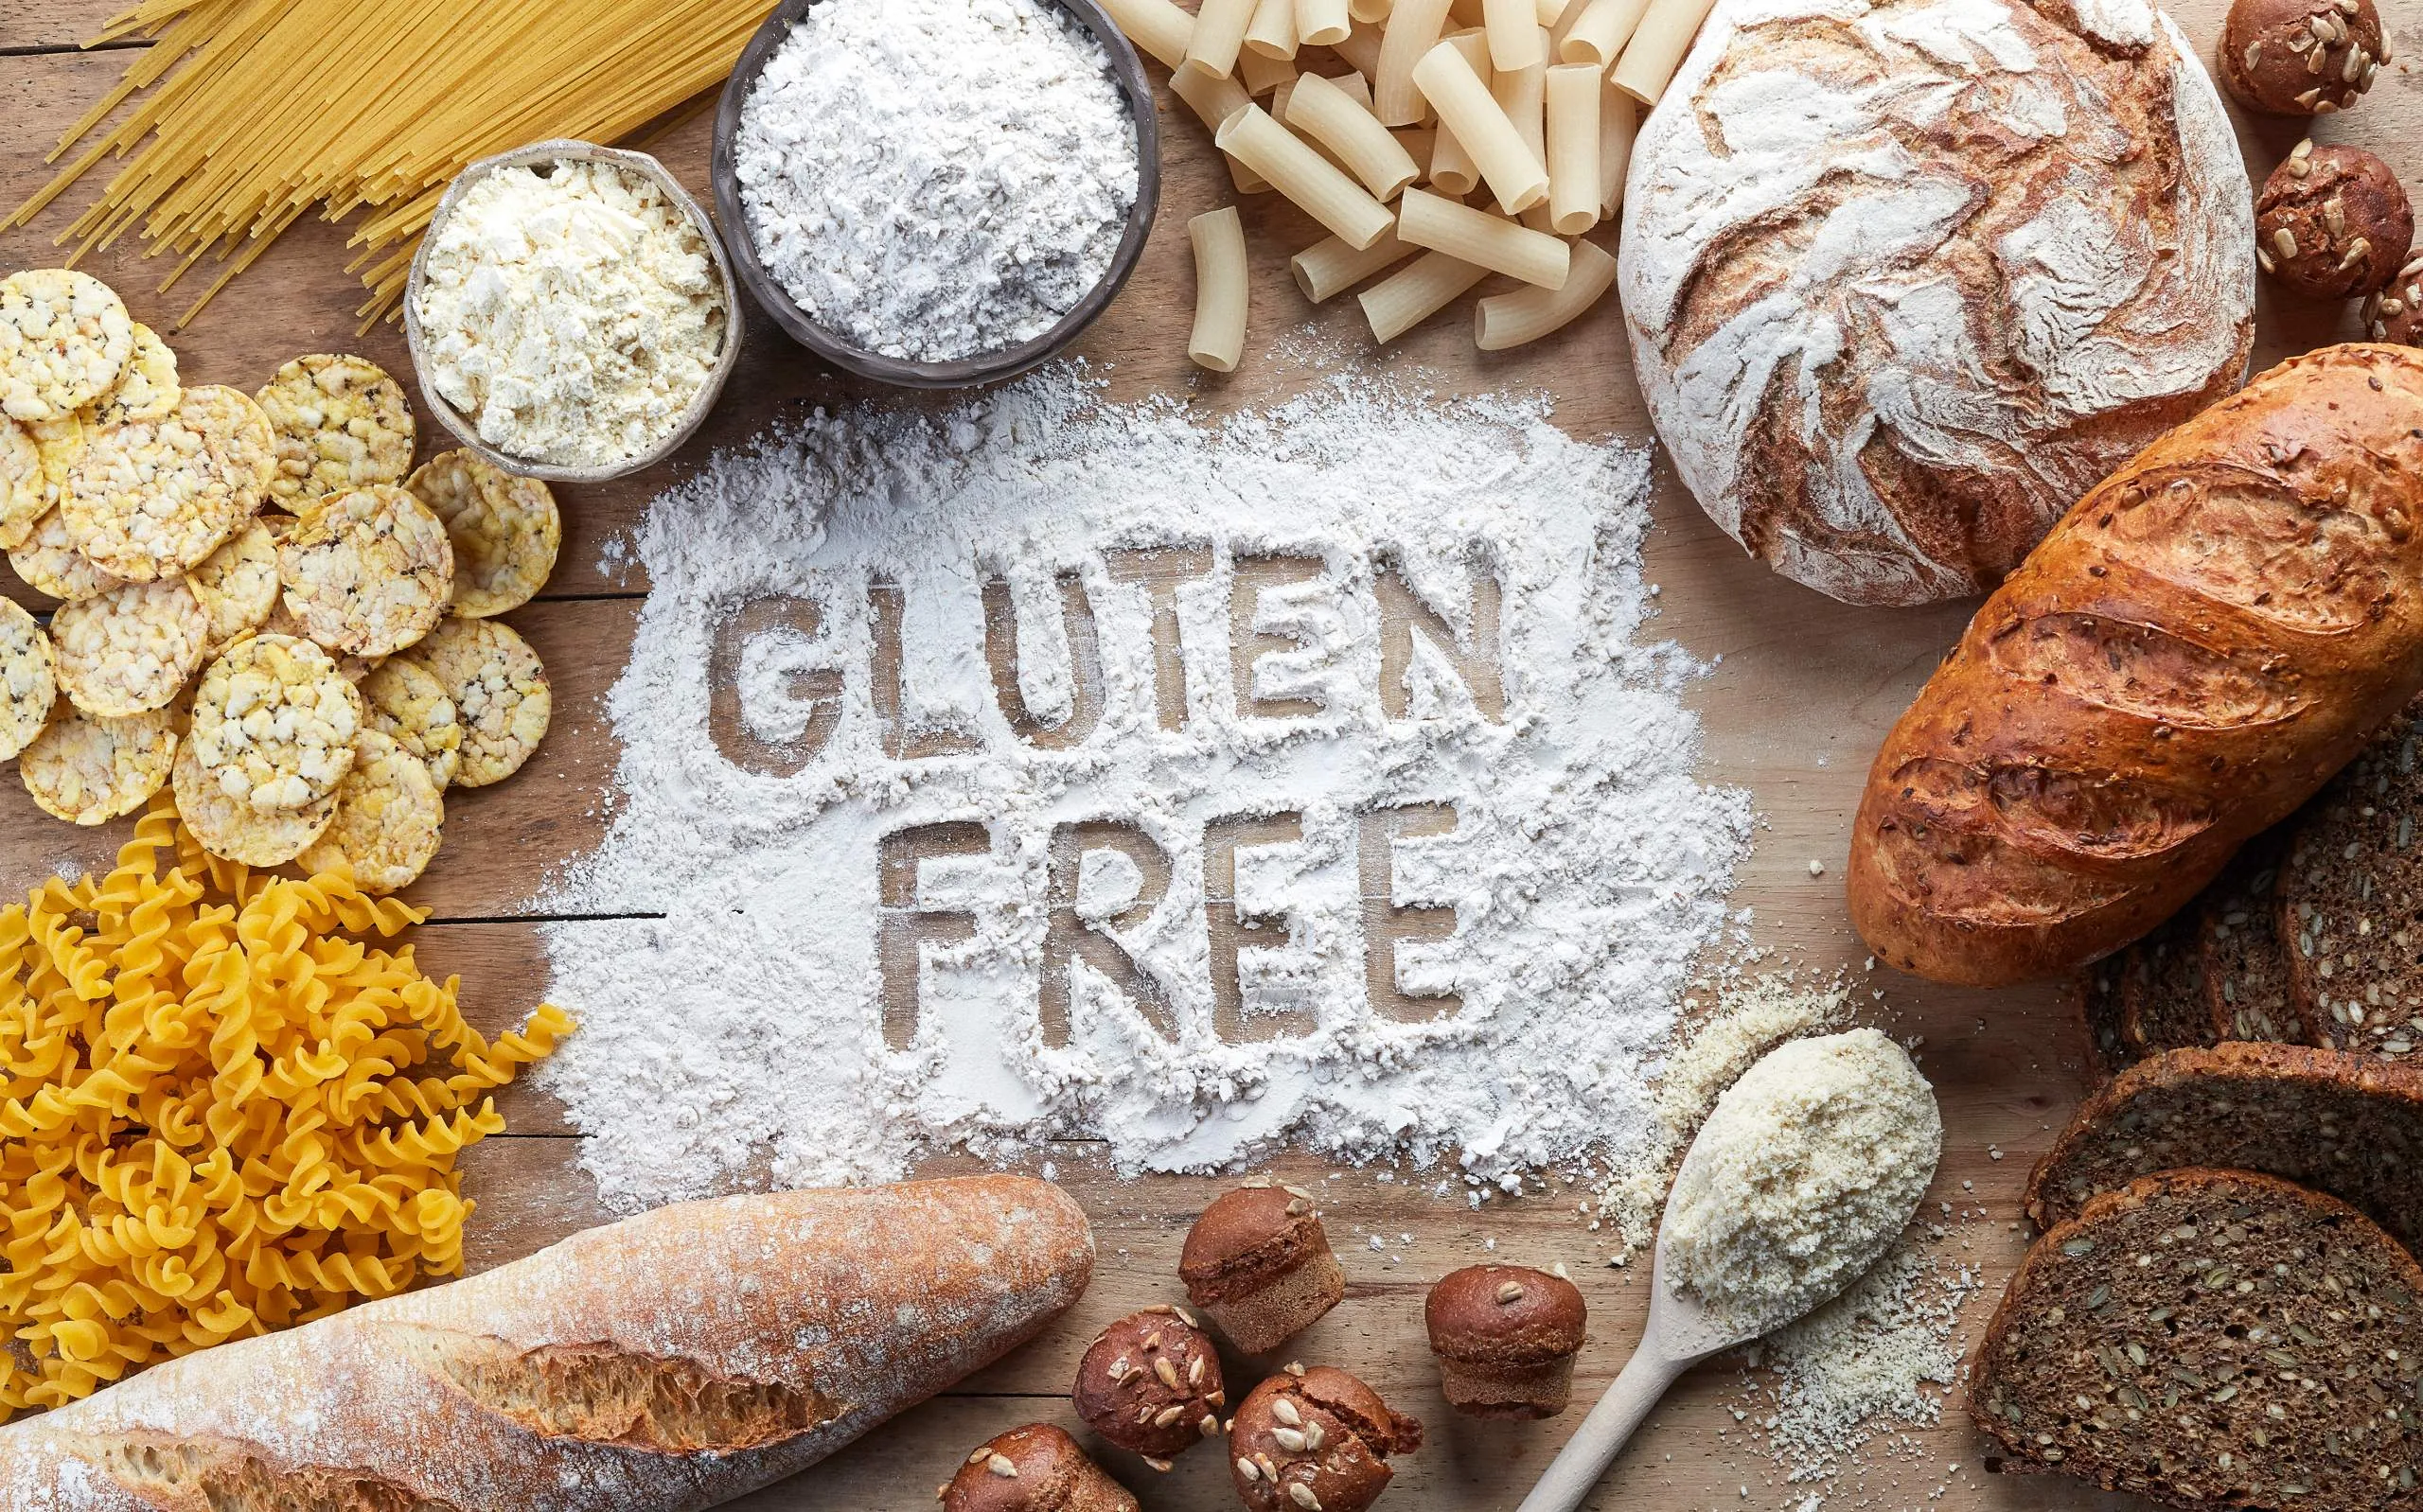 Ready to Give Up Gluten? Here’s What to Expect